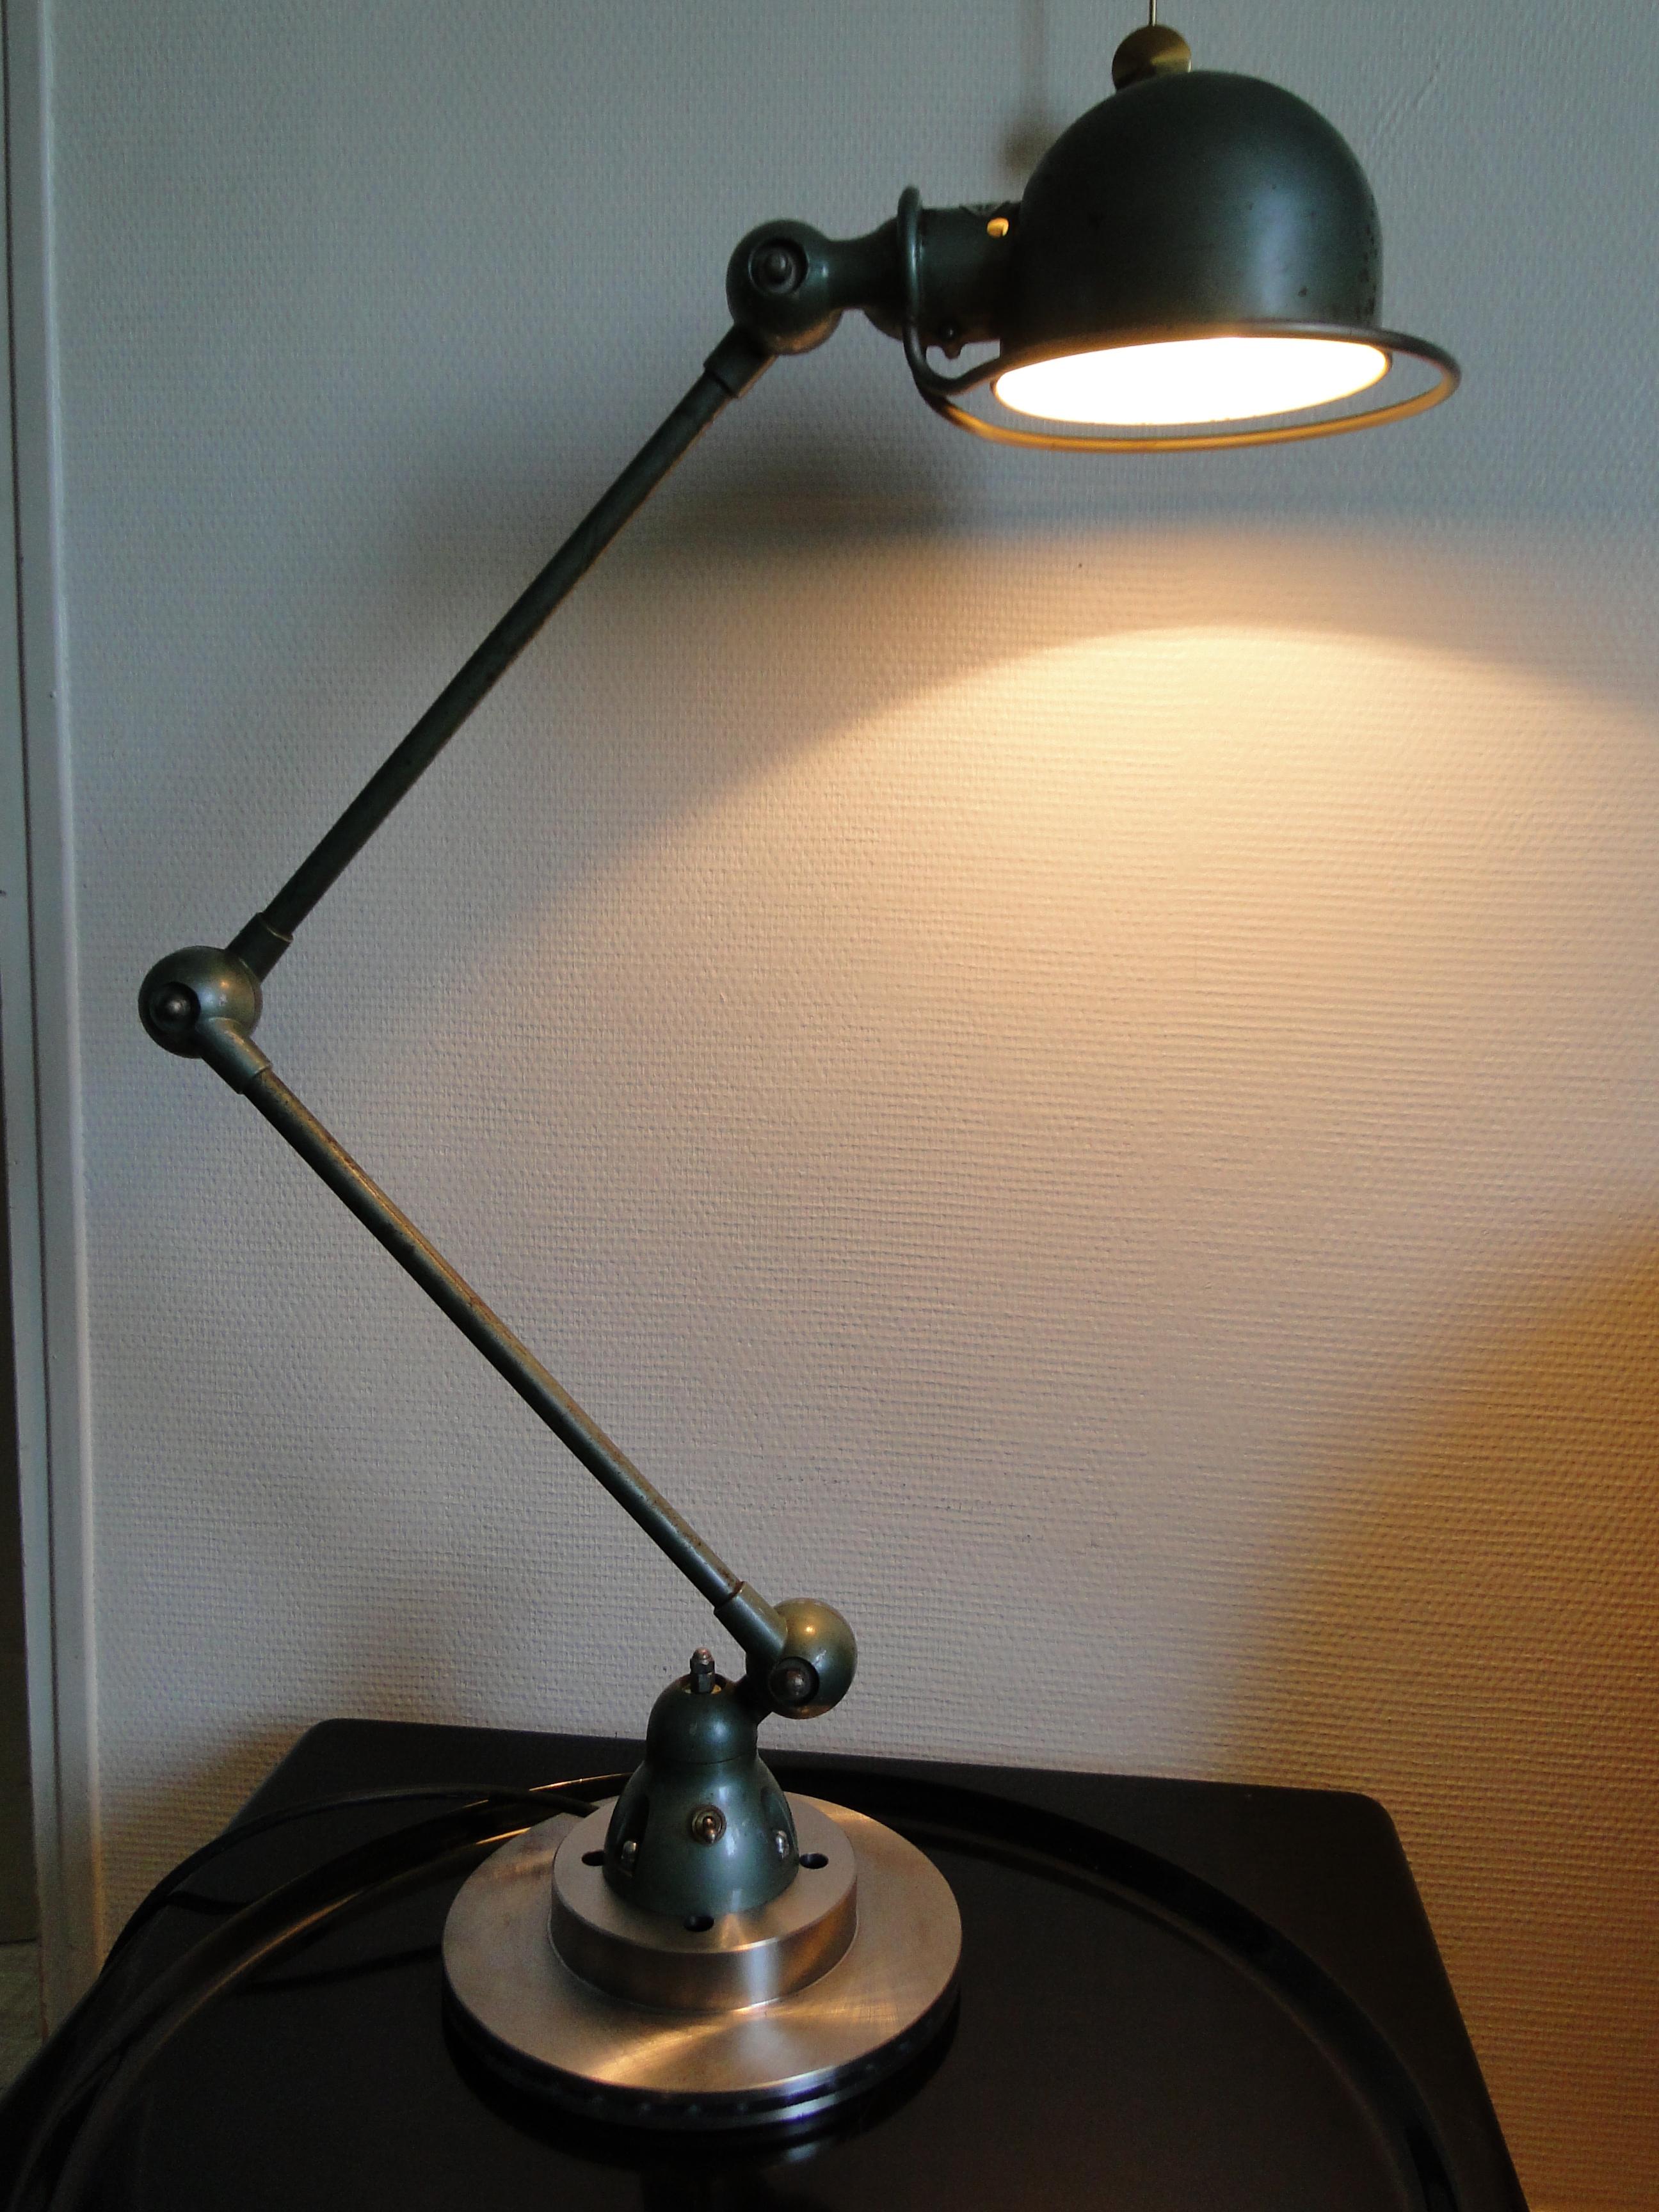 2 Armed Jielde lamp reading lamp French industrial lamp.

Designed by Jean-Louis Domecq in the early 1950s

Original Jielde lamp

The lamp stands on a new ventilated brake disc, which guarantees the best stability

The electrification has